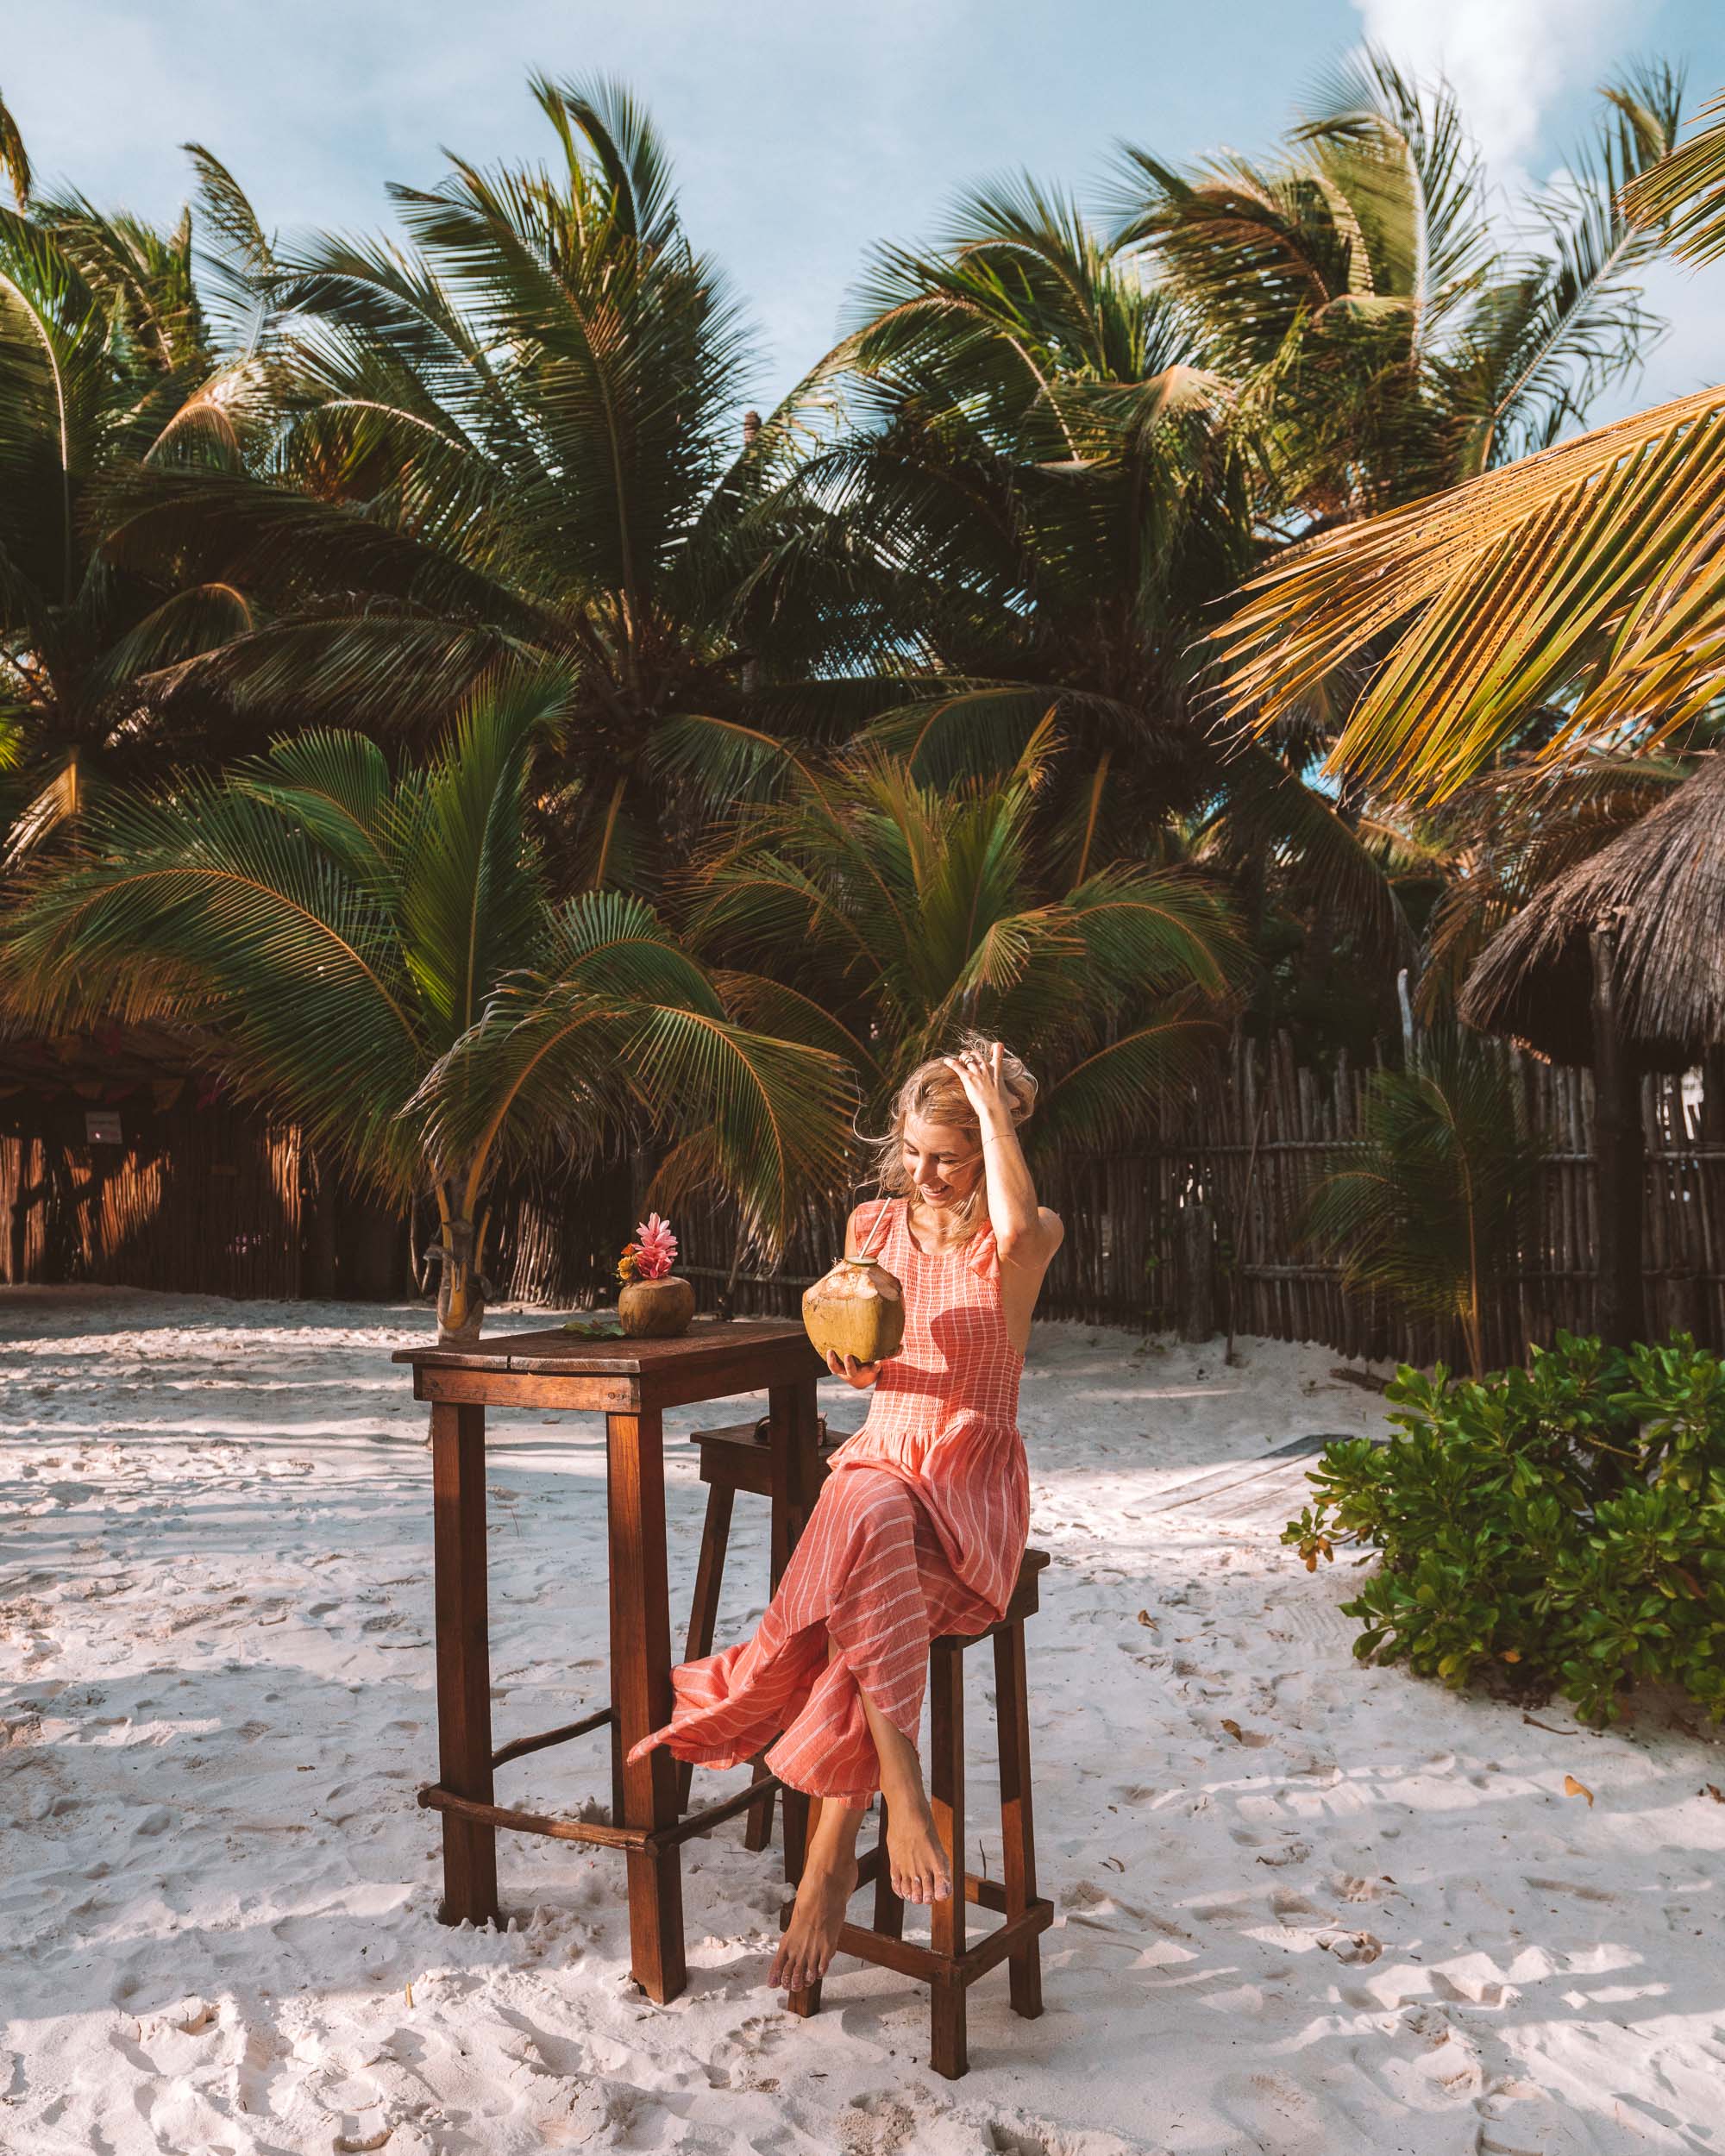 Pink dress in Tulum Mexico via Find Us Lost